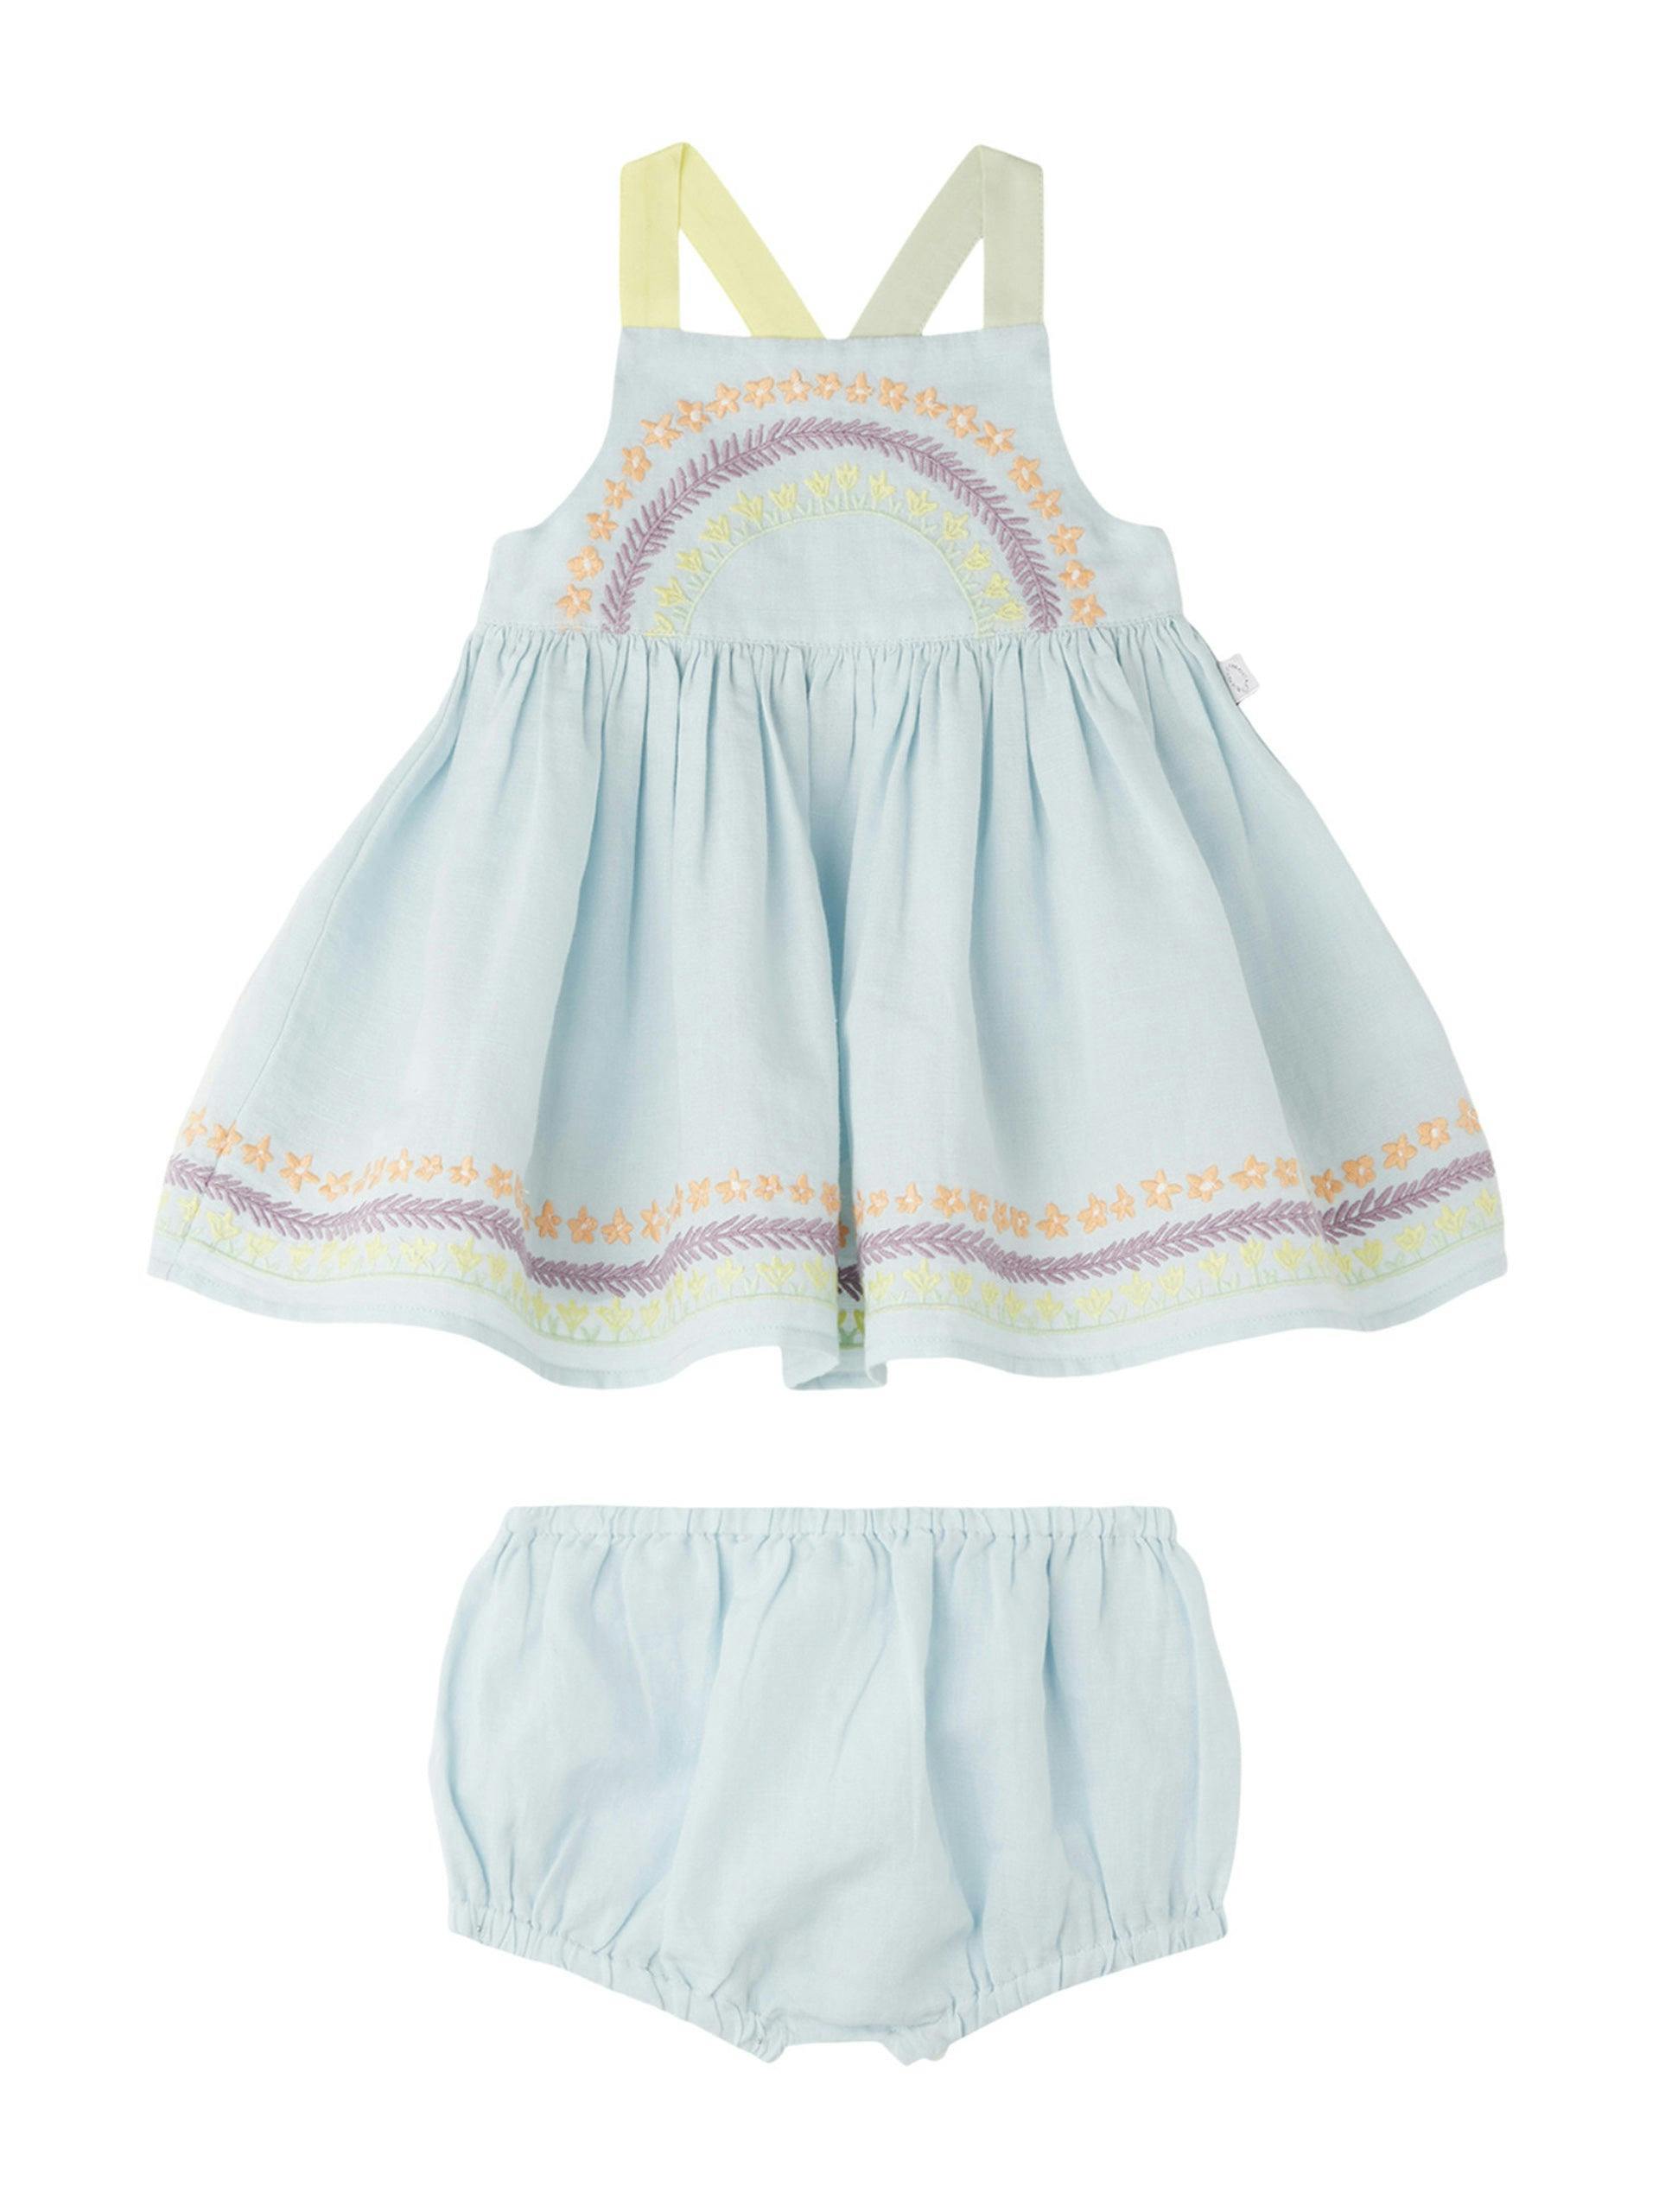 Poplin dress and bloomers with embroidery detail